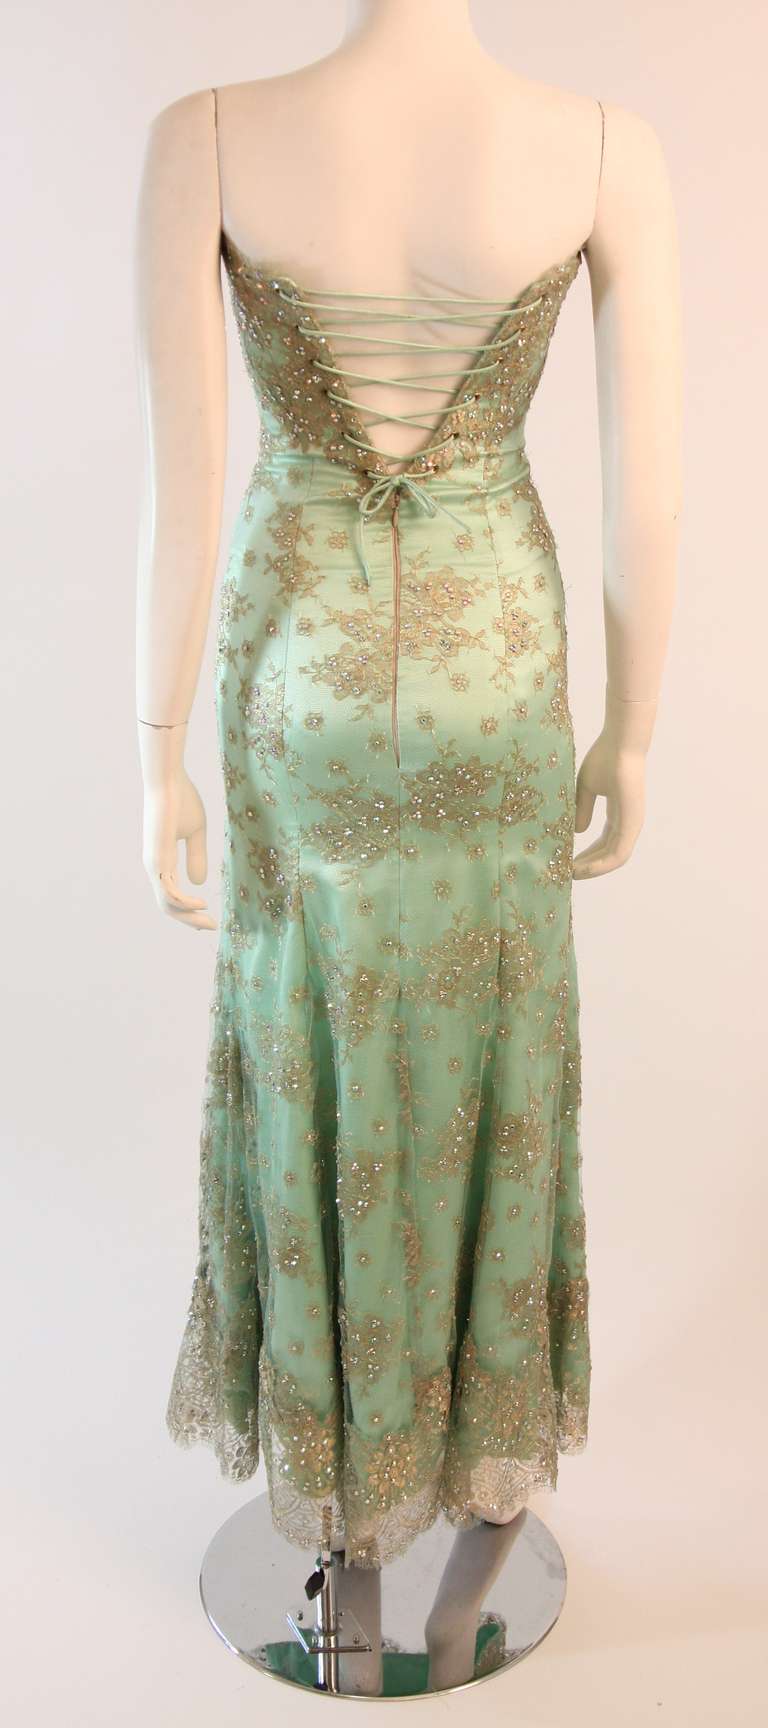 Sensational Aqua Baracci Lace and Rhinestone Gown In Excellent Condition For Sale In Los Angeles, CA